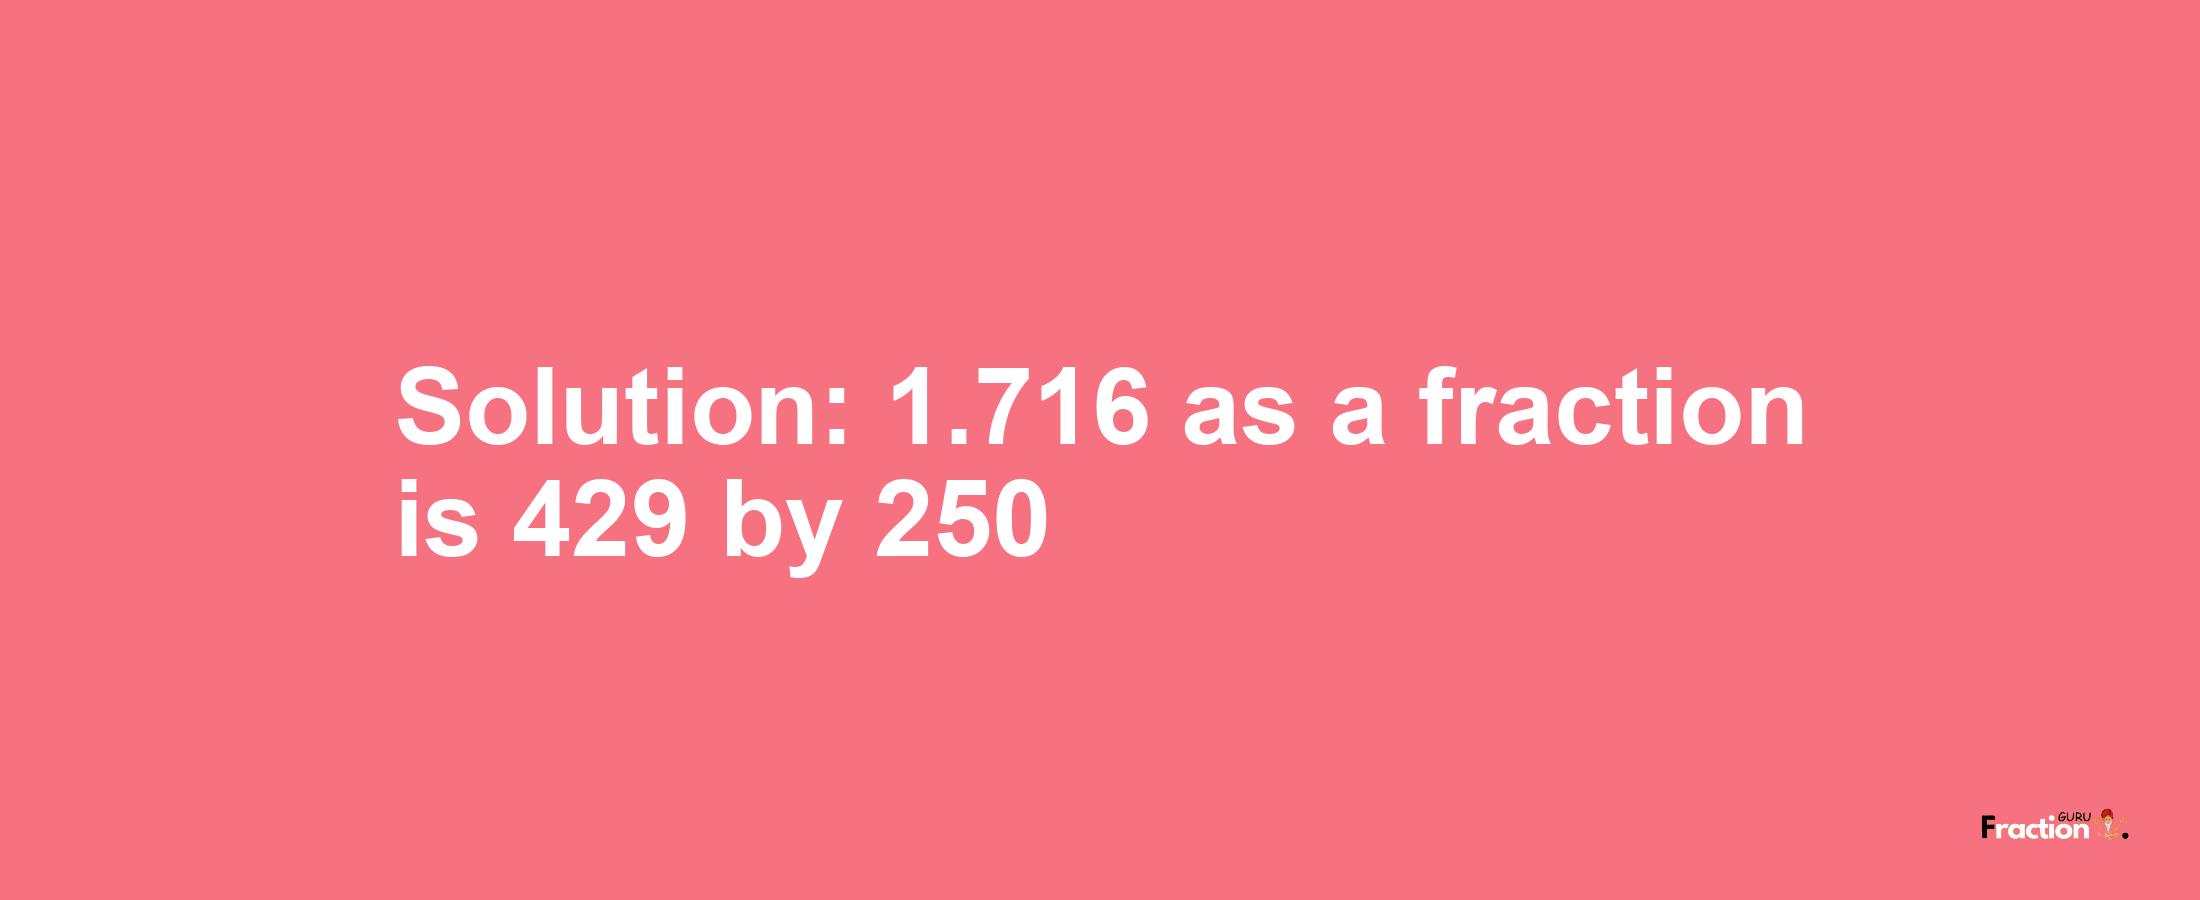 Solution:1.716 as a fraction is 429/250